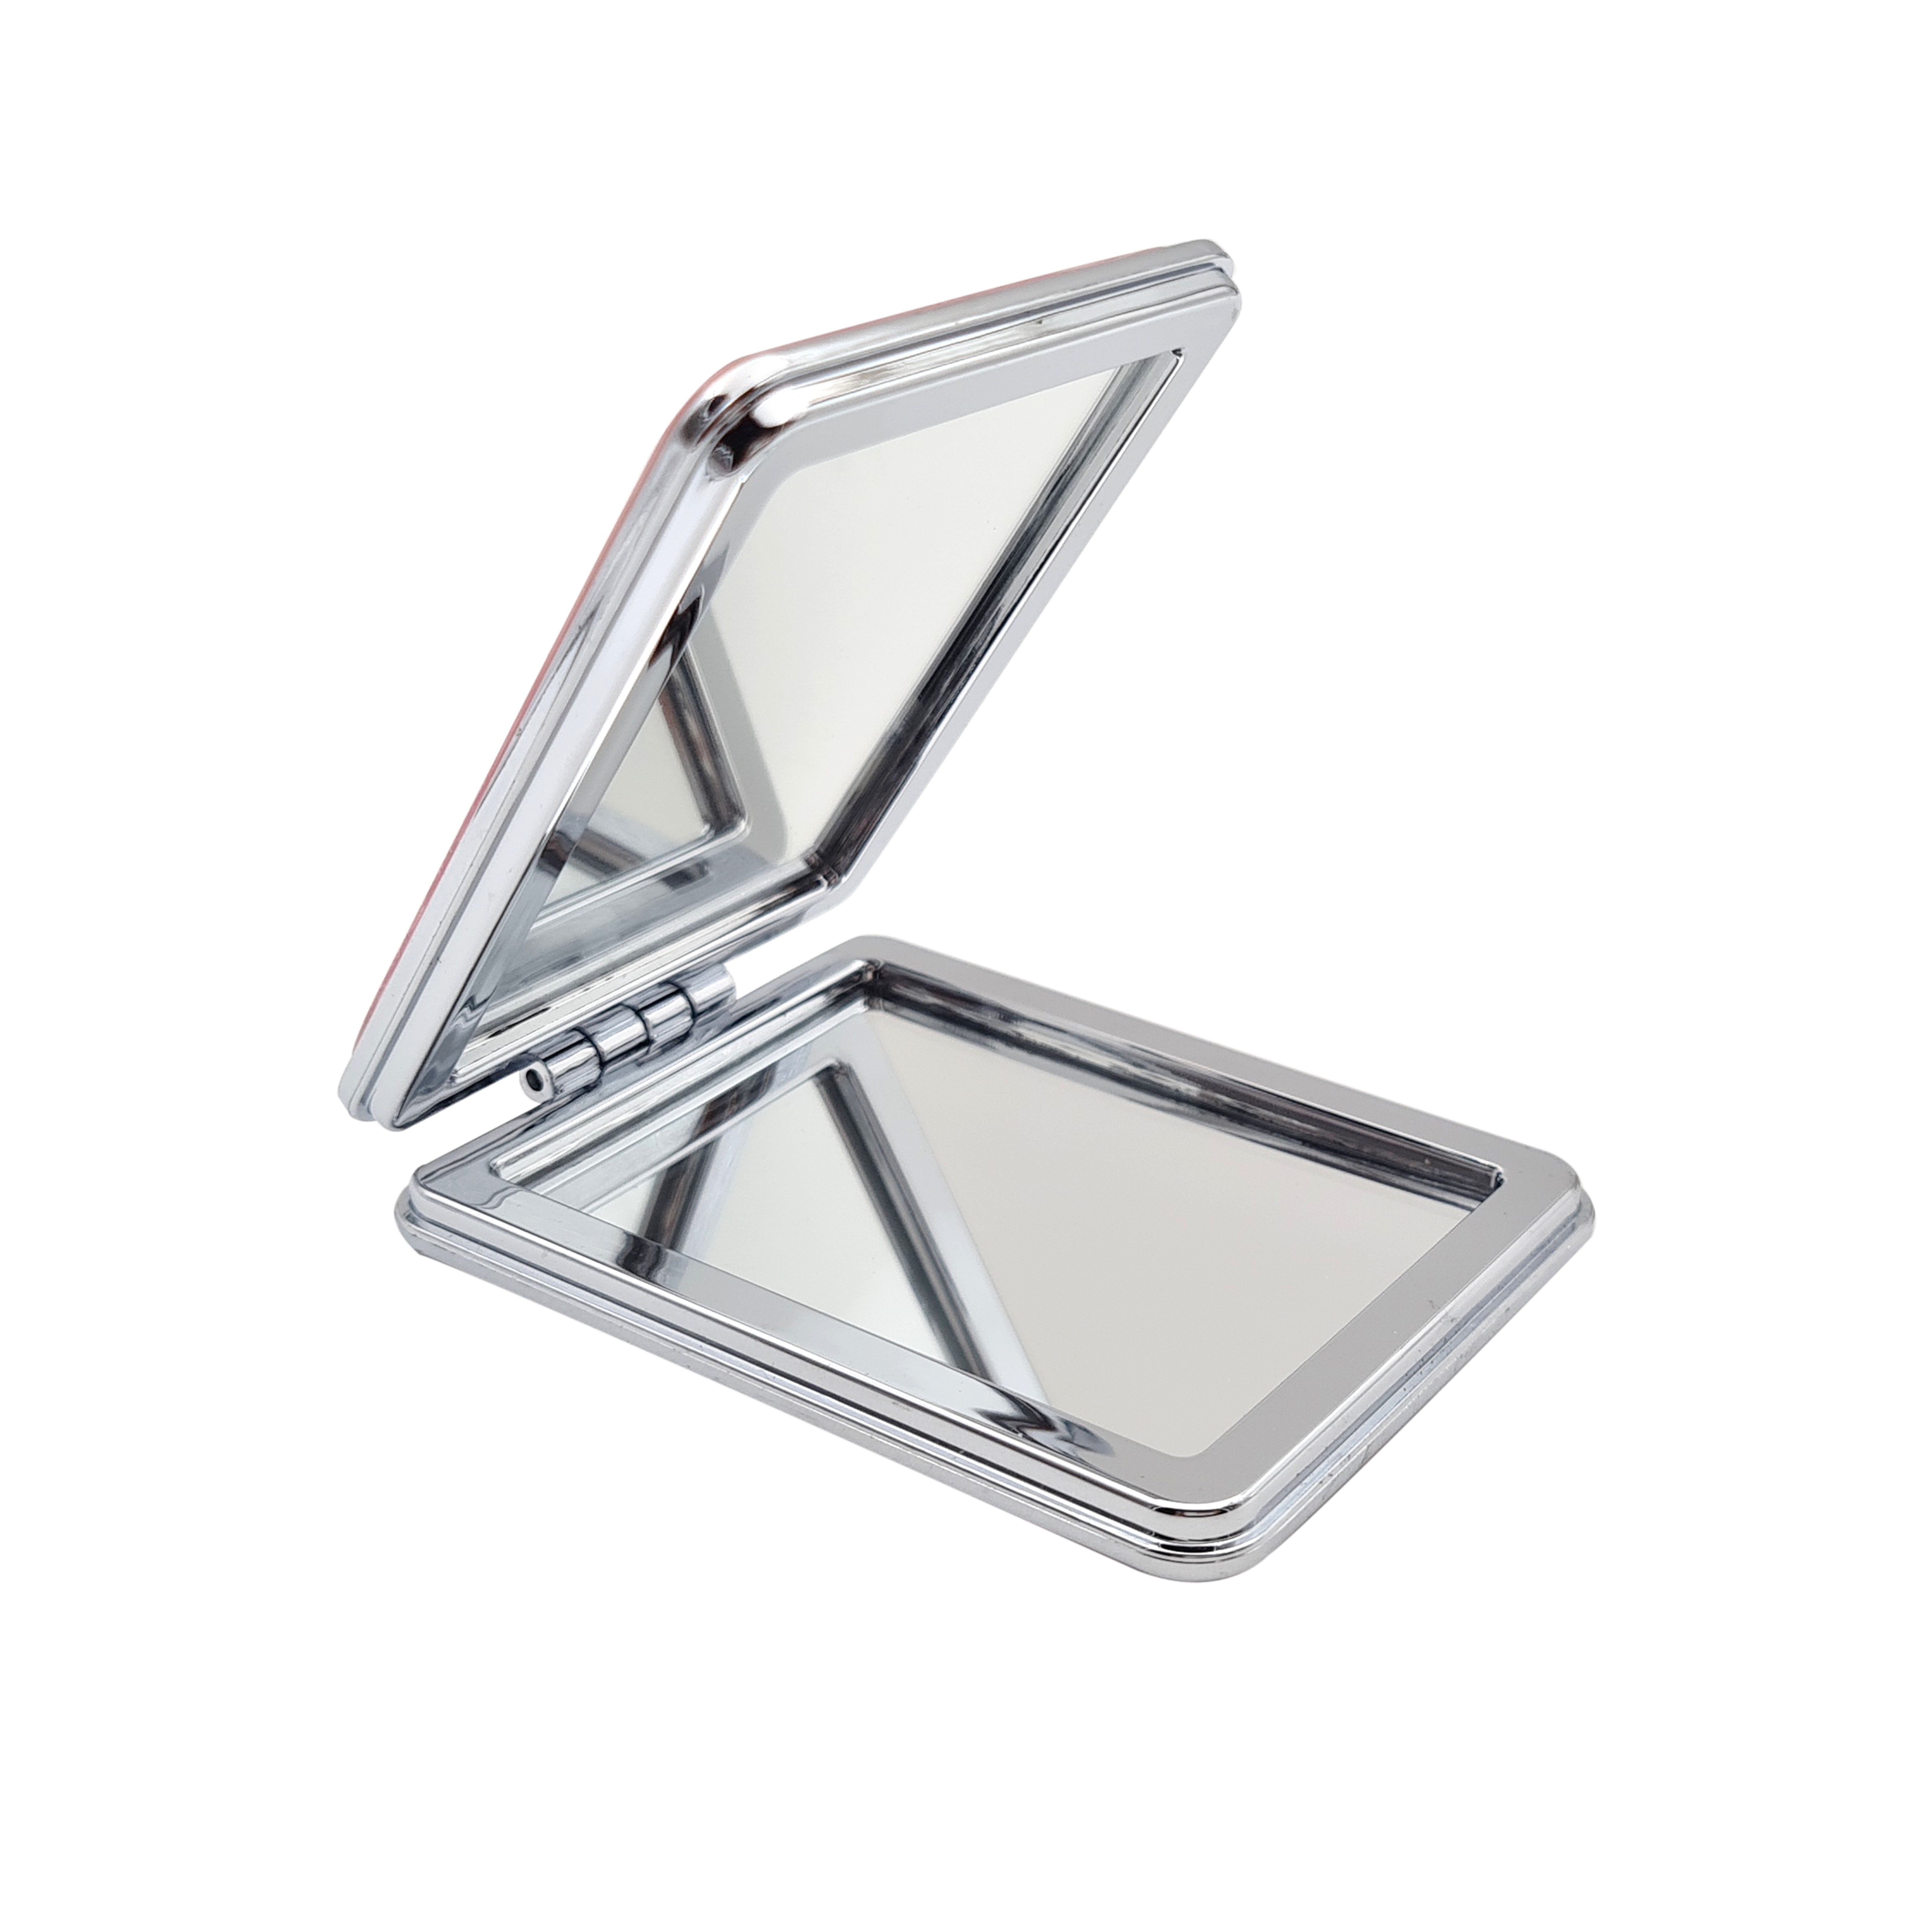 Majestique Compact Mirror With 1x And 2x Magnification- 180 Degree Opening (Color May Vary)